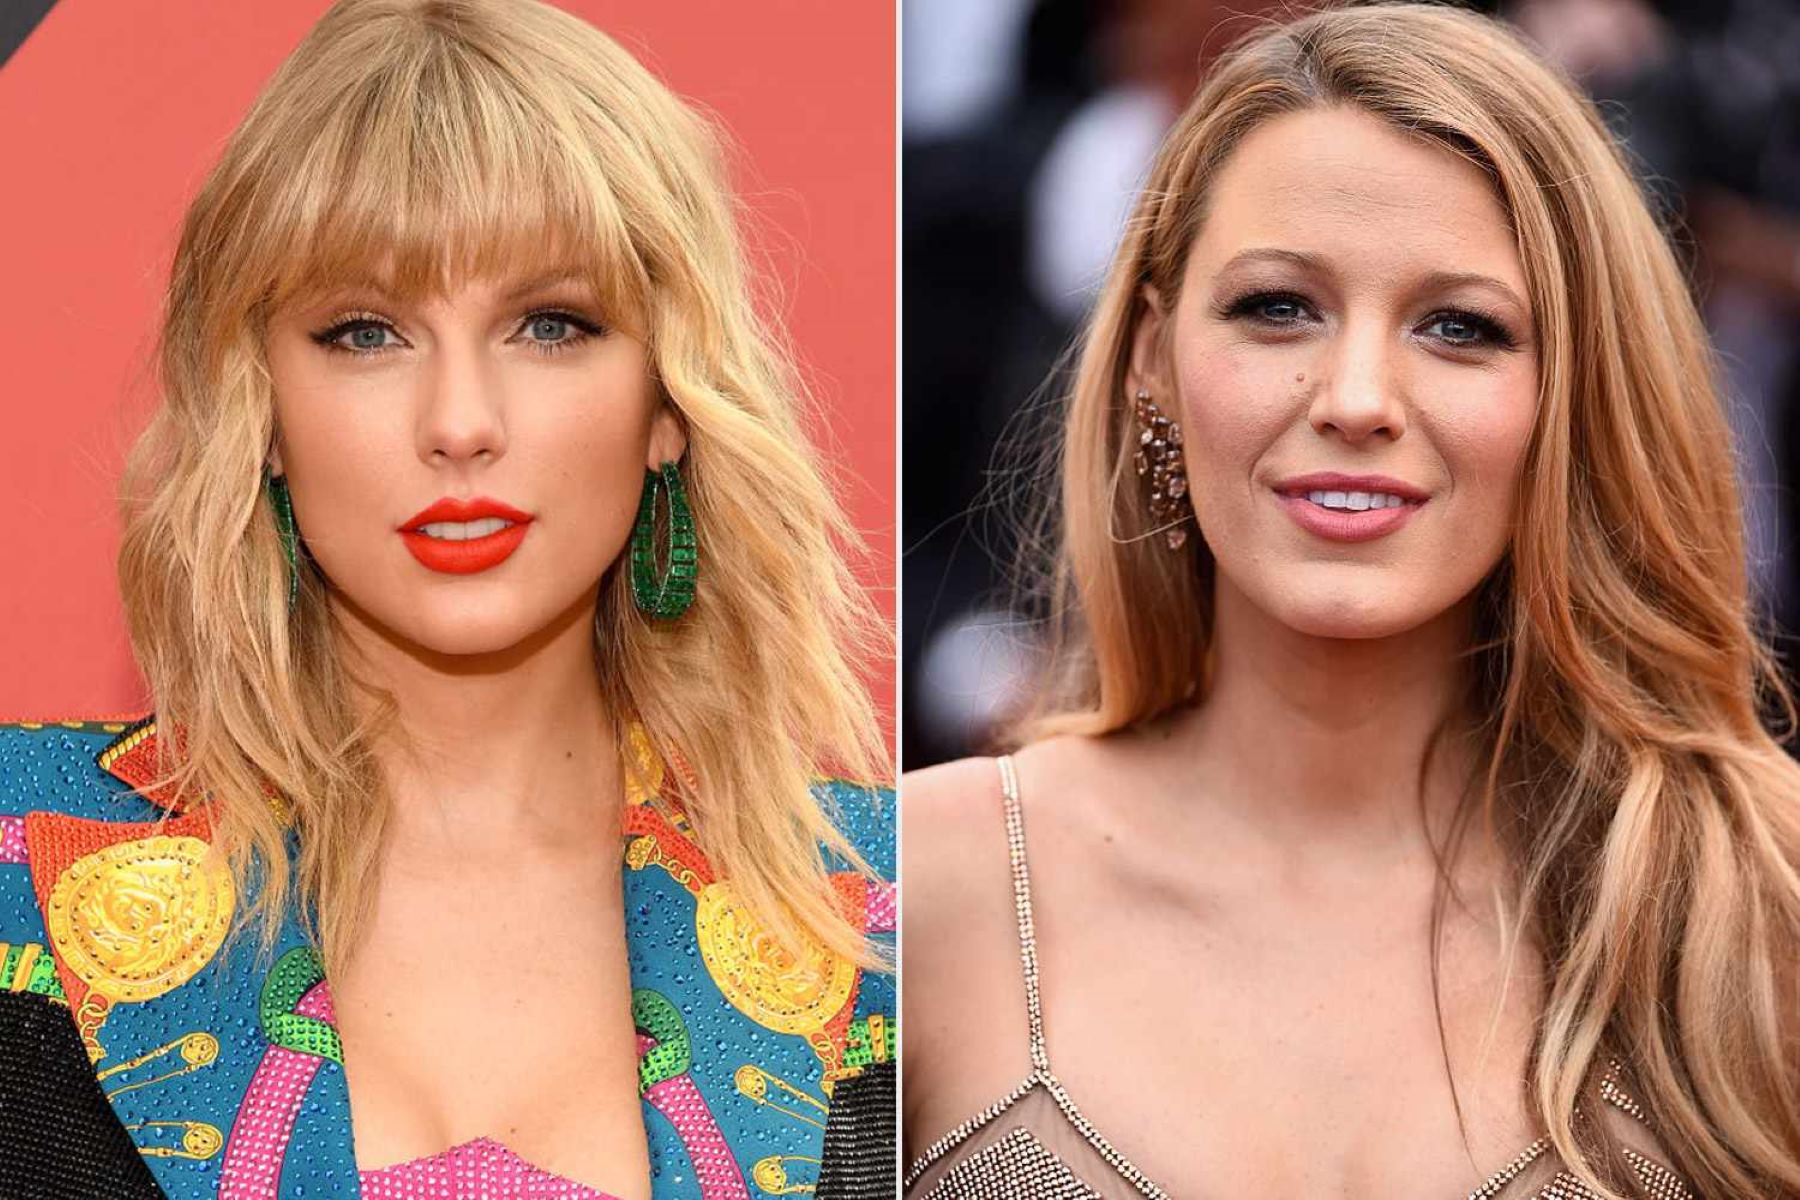 taylor-swift-and-blake-lively-enjoy-a-fun-girls-night-out